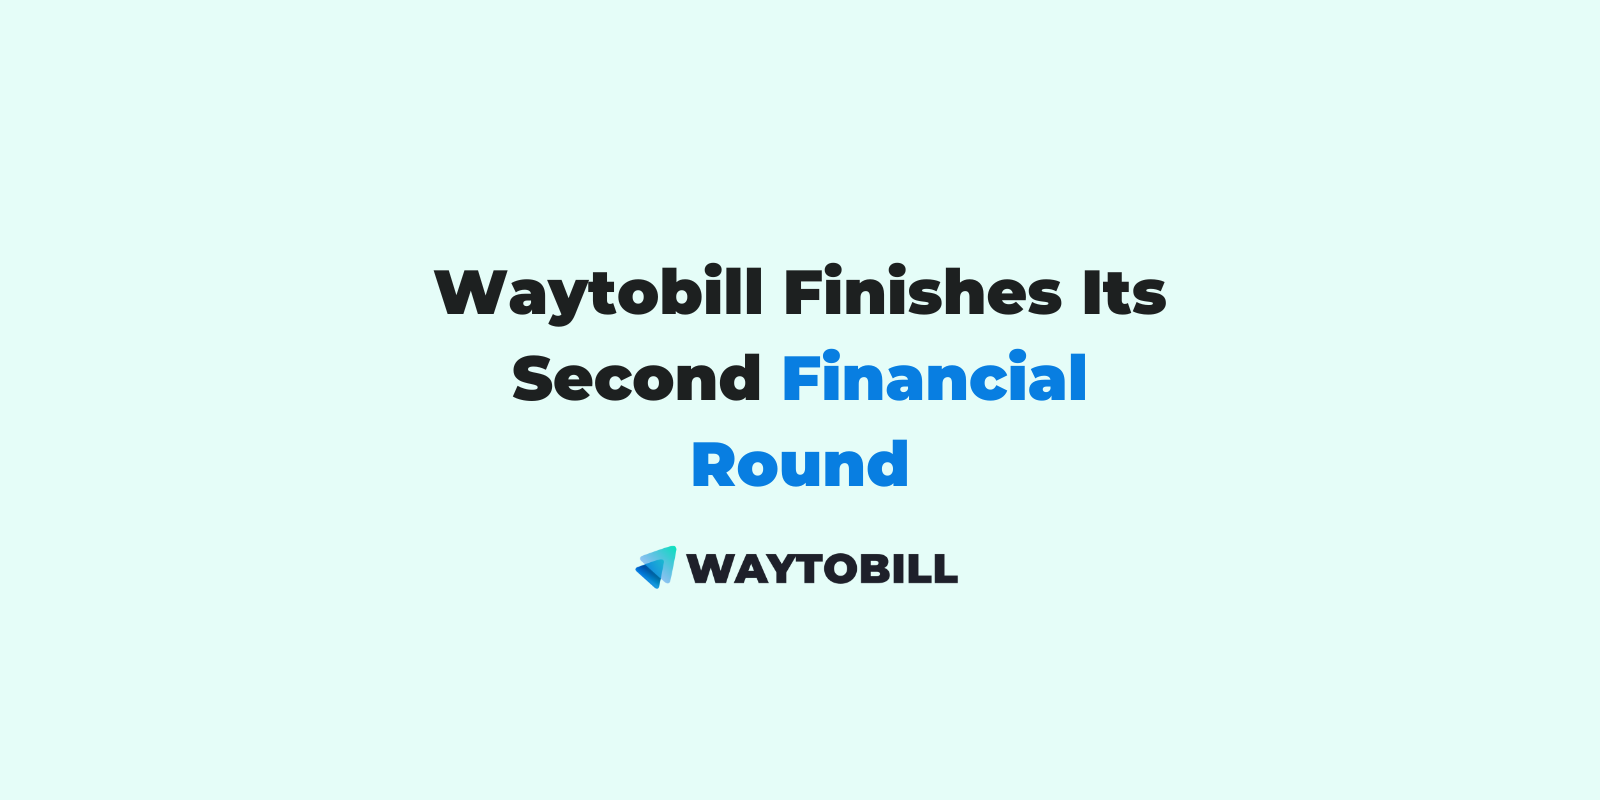 Waytobill Finishes its Second Financial Round